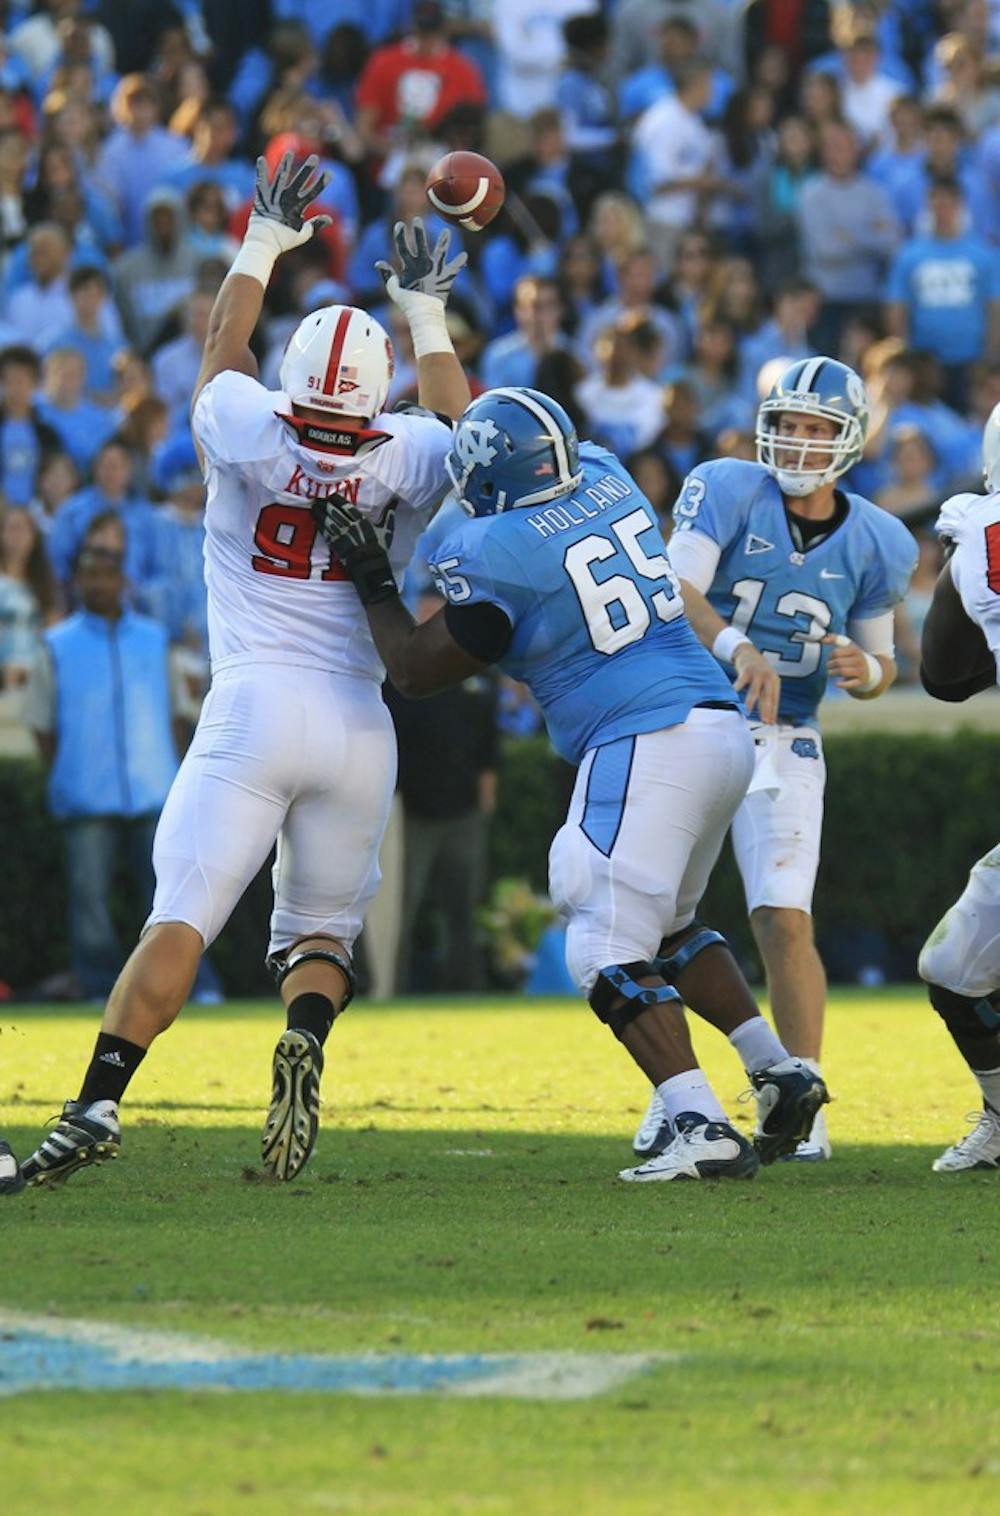 T.J. Yates set UNC records in both single-season and career-passing marks. Yates finished Saturday’s game with 411 yards and two touchdowns.